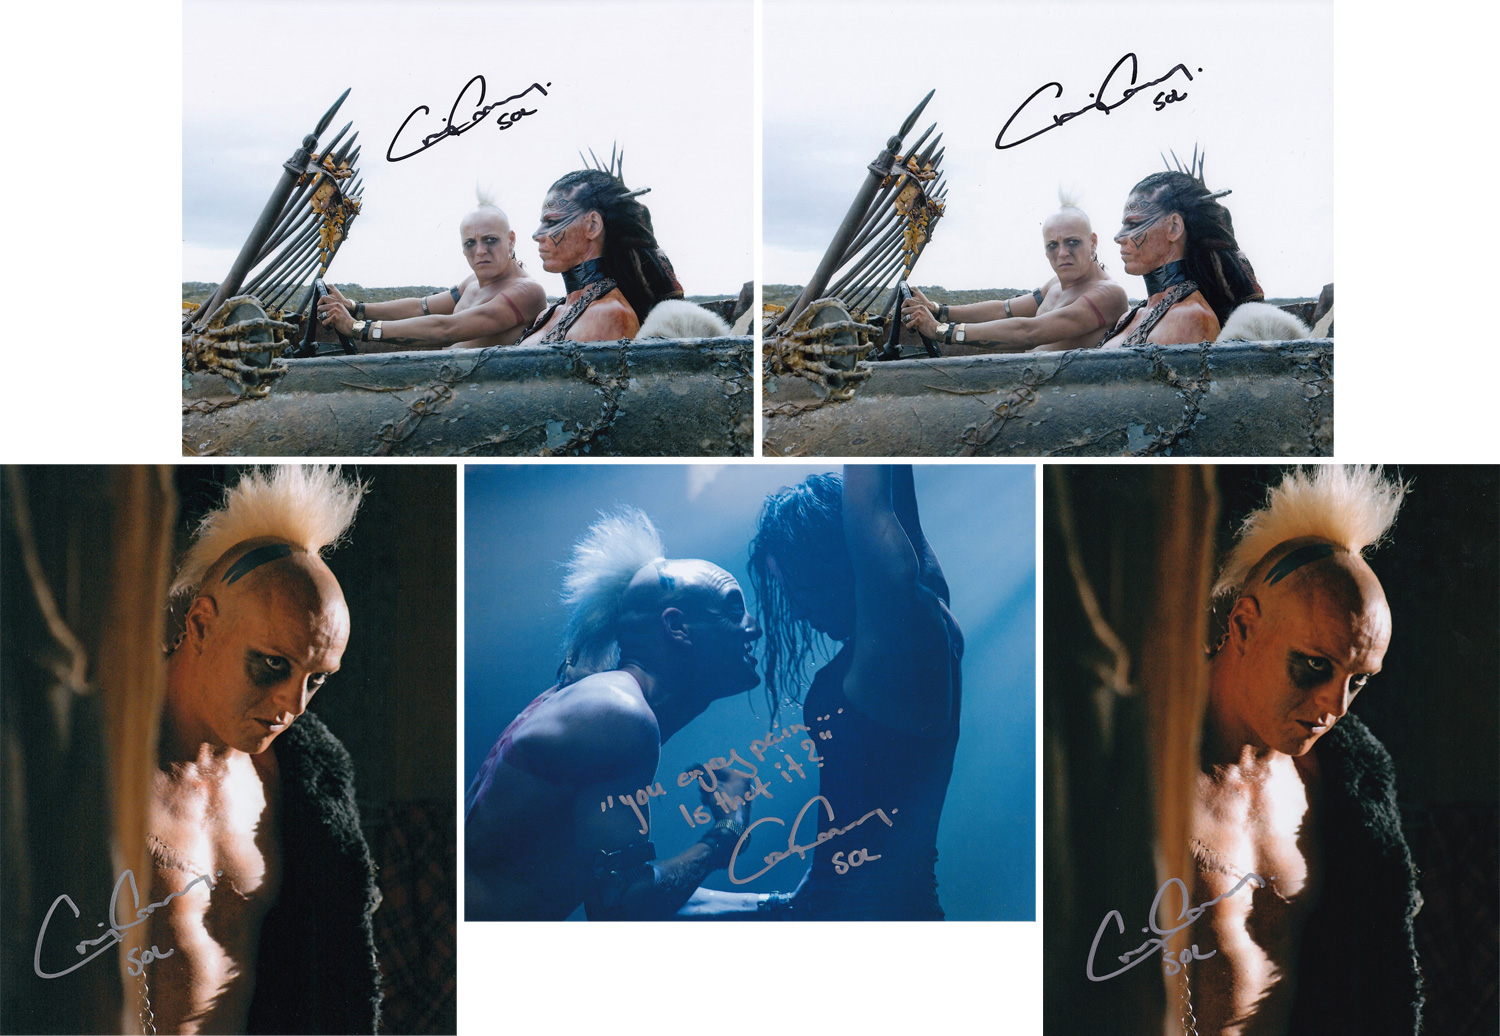 SALE! Lot of 5 Doomsday hand signed 10x8 photos. This is a beautiful lot of 5 hand signed photos, - Image 2 of 6